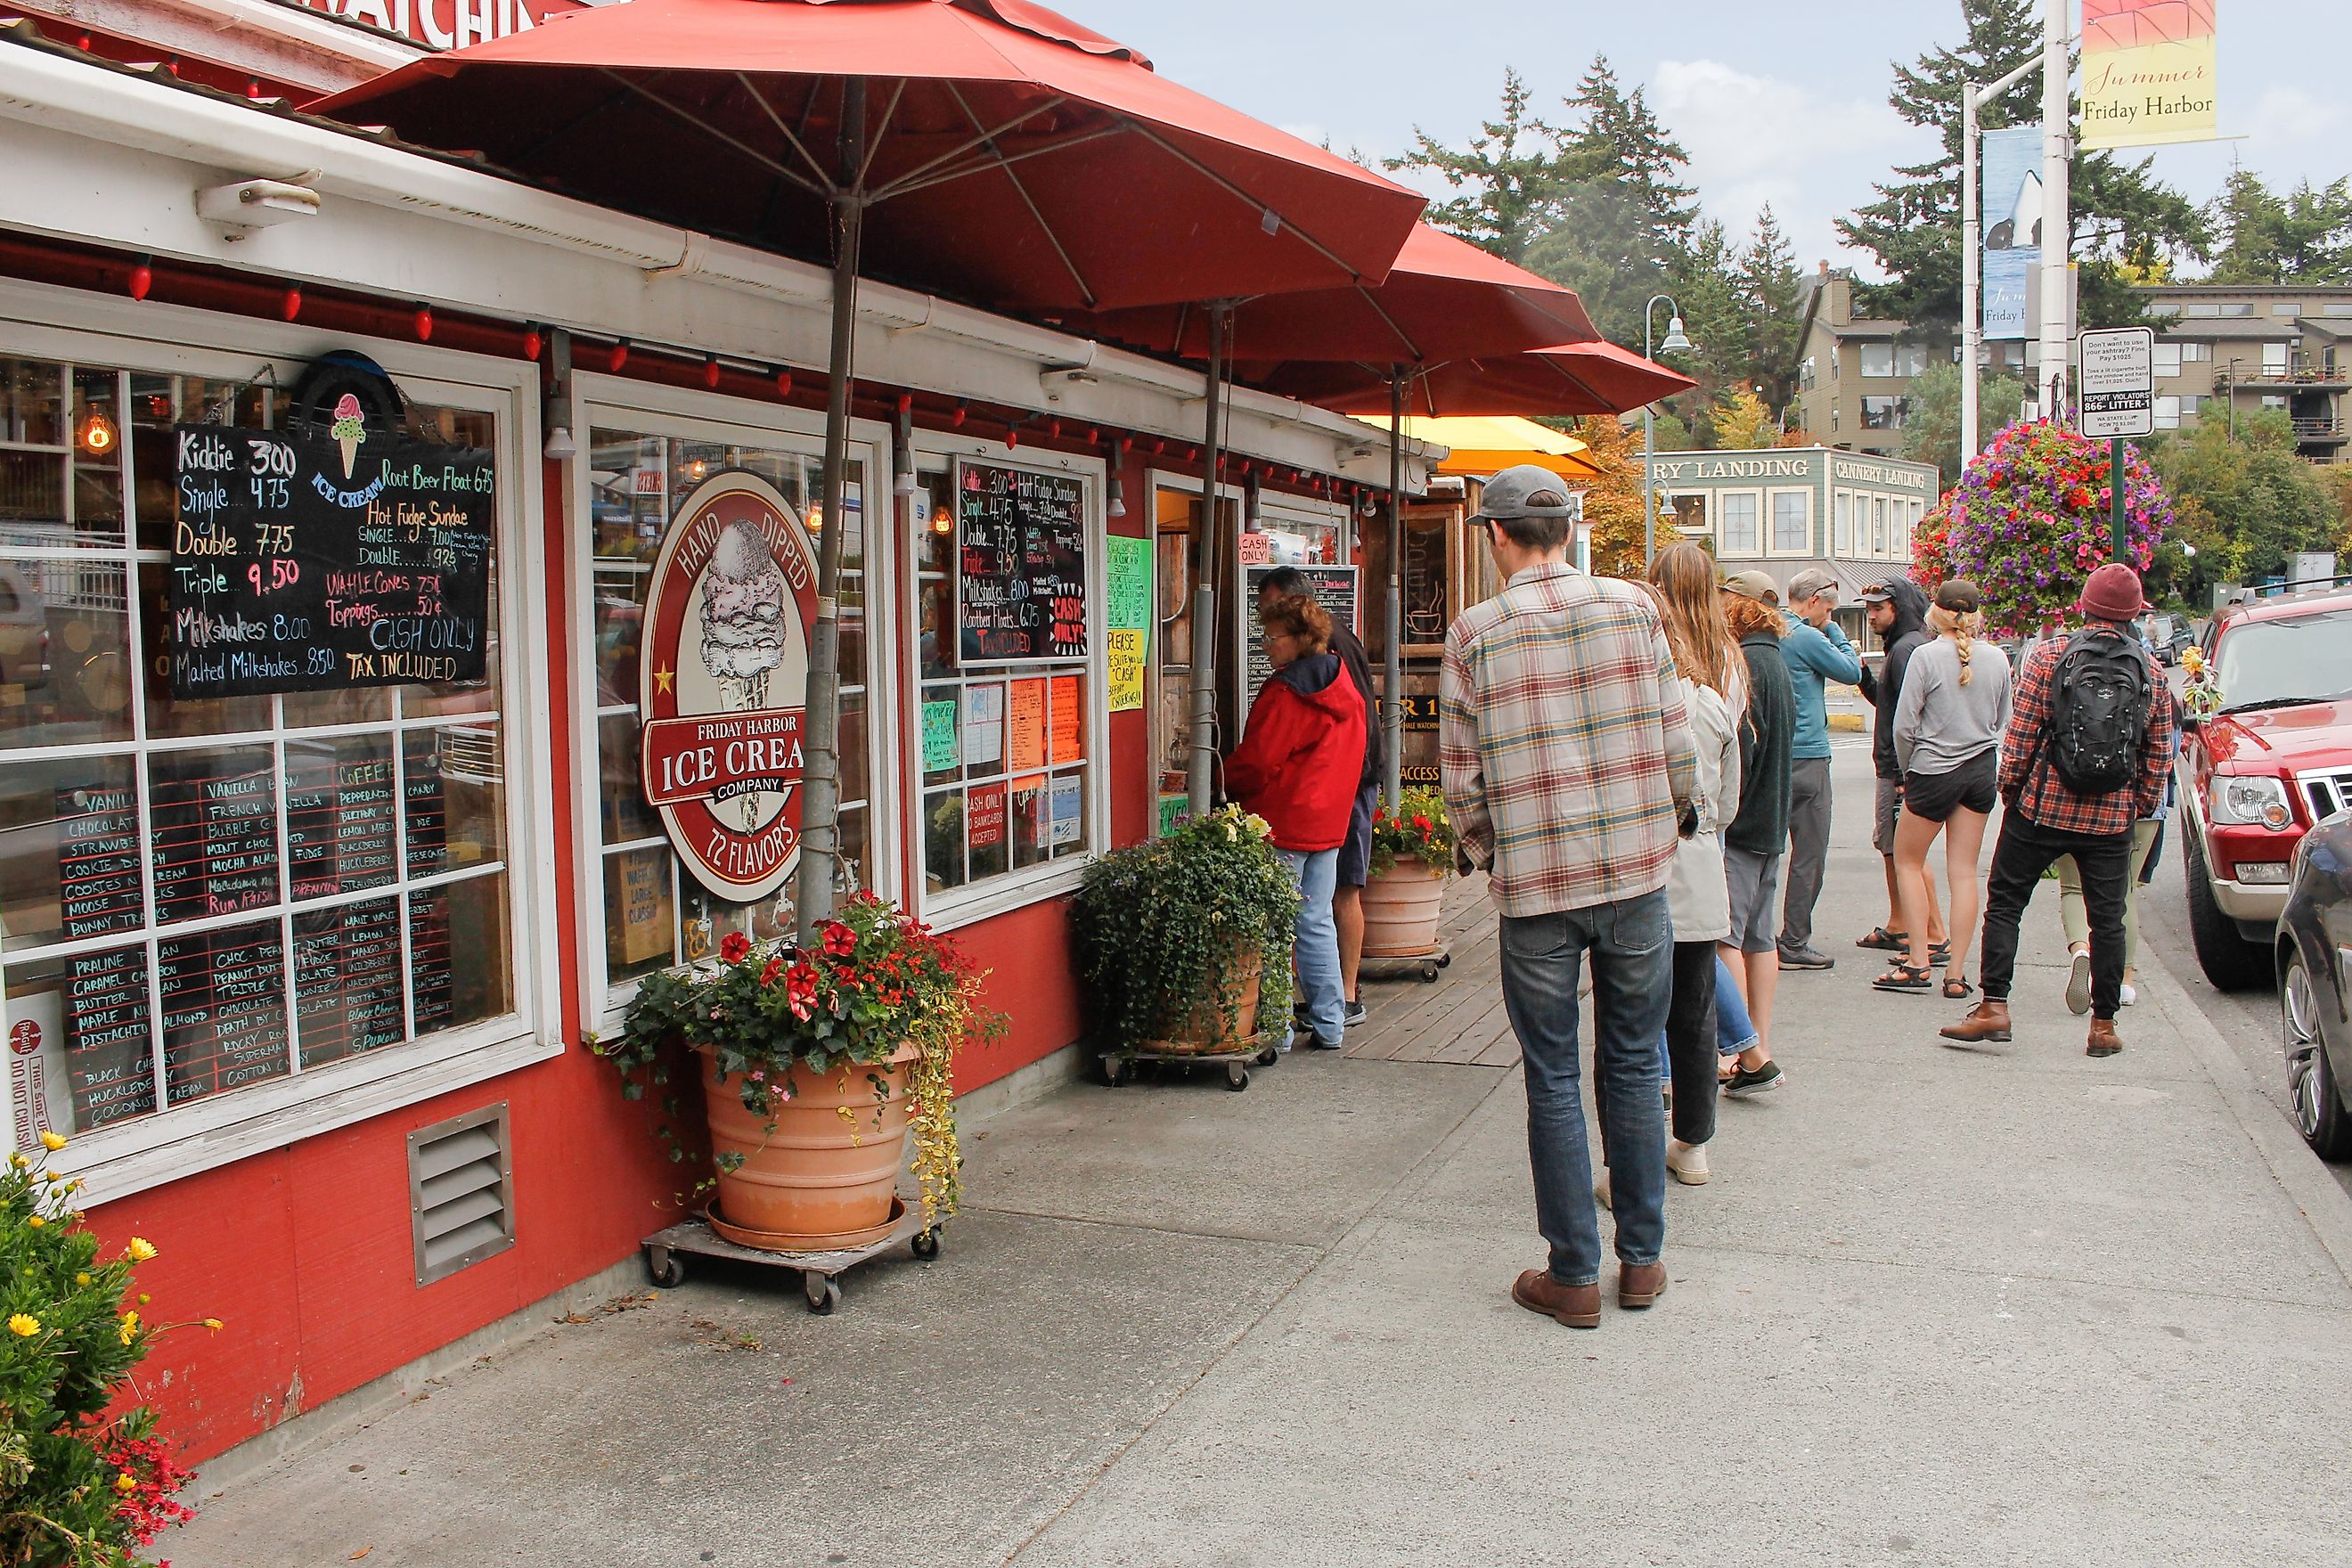 Customers waiting to order at the Friday Harbor Ice Cream Company in Friday Harbor, Washington. Editorial credit: The Image Party / Shutterstock.com.